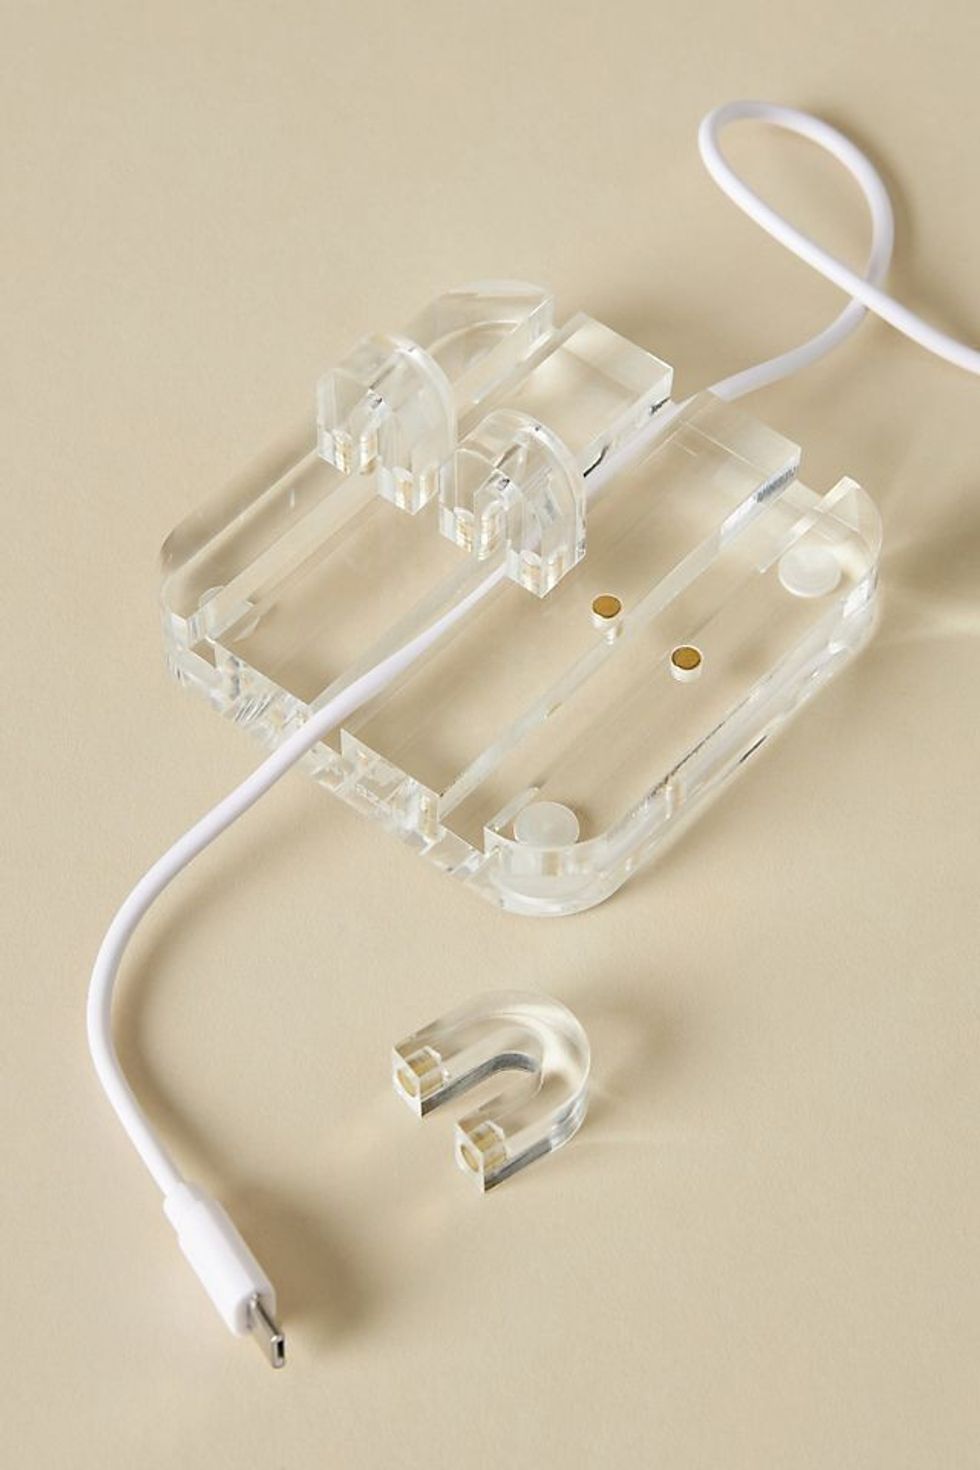 Russell + Hazel Acrylic Cord Manager ($10)